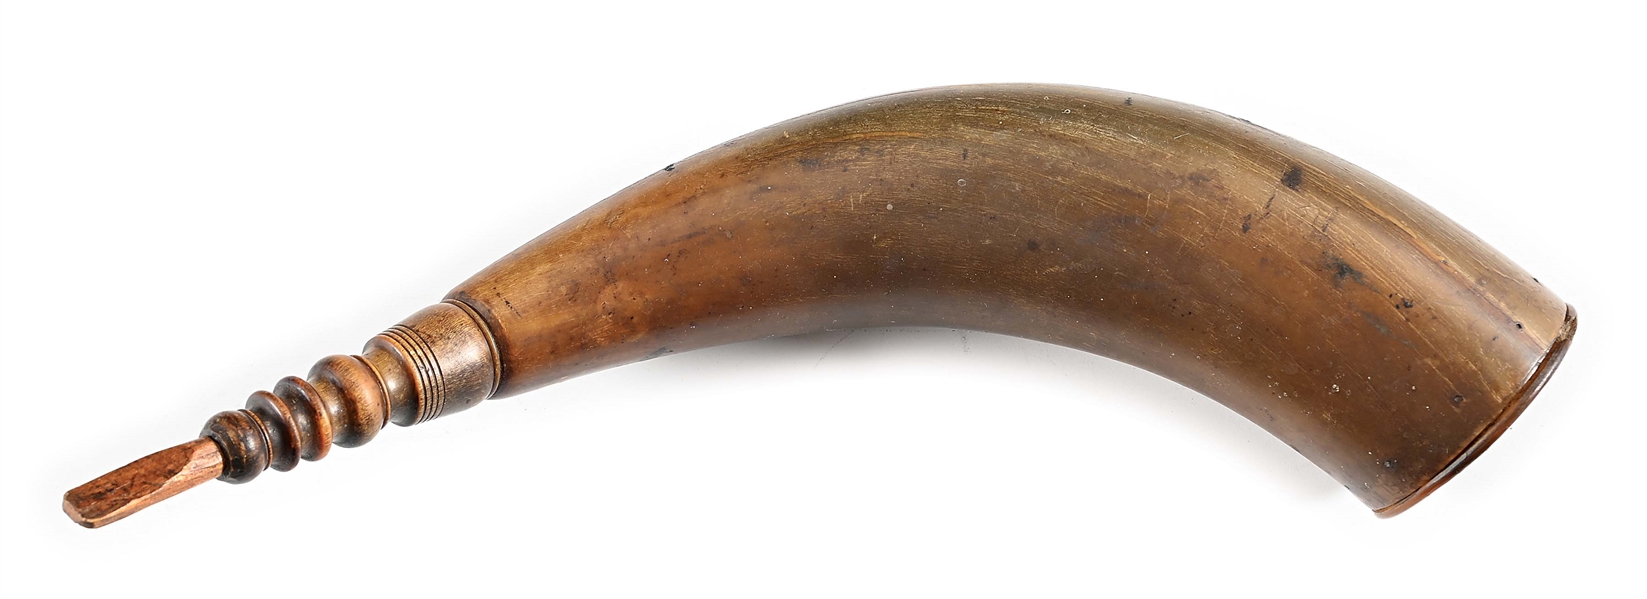 UNIQUE SOUTHERN SCREW TIP POWDER HORN.